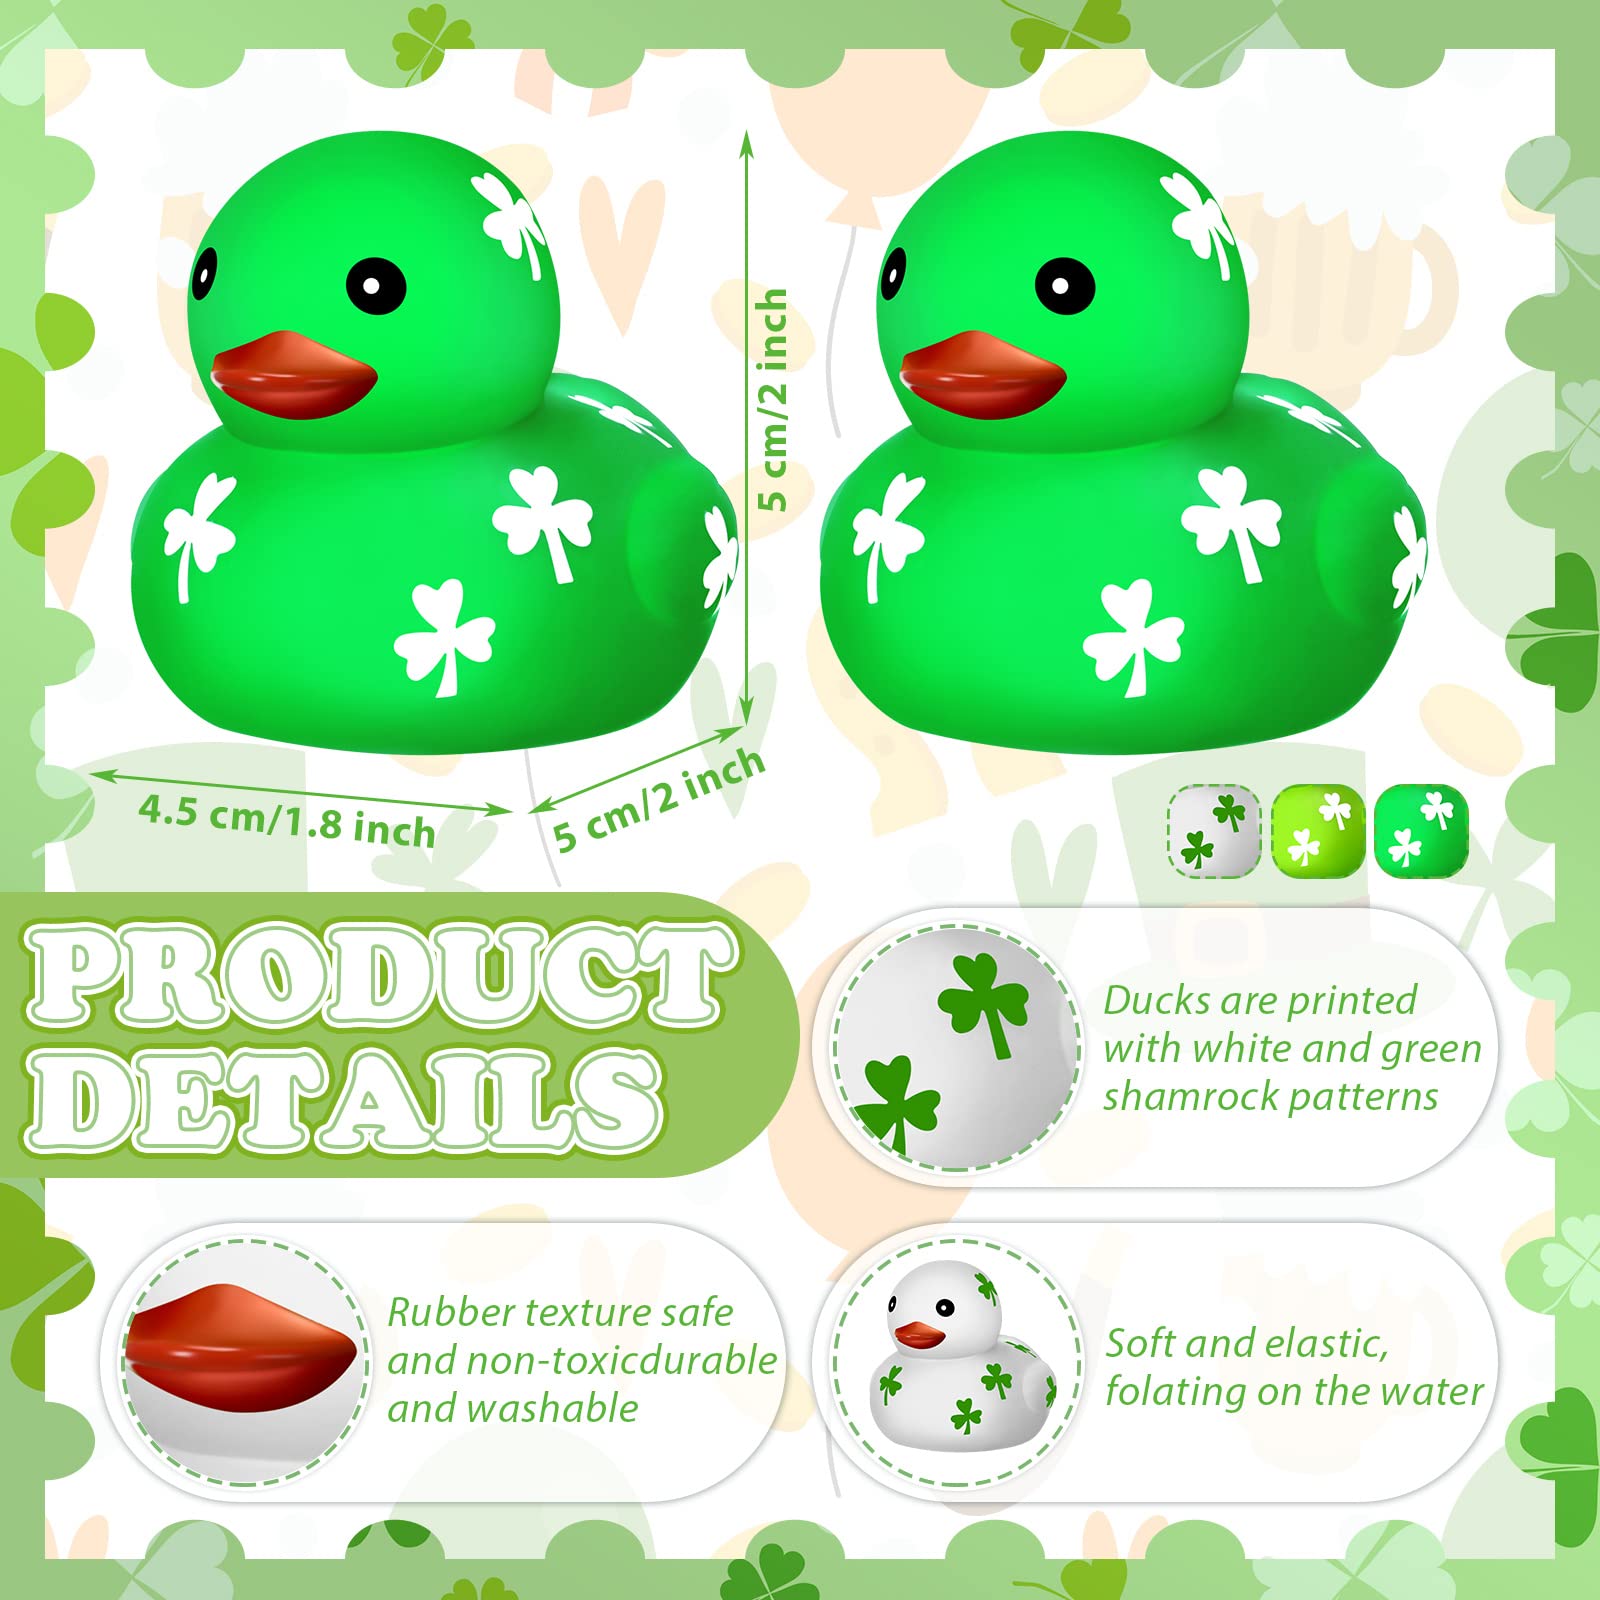 St. Patrick's Day Rubber Ducks Bath Toys Mini Ducks Holiday Toys Ducky Gifts Bath Decoration Safety Duck Mini Irish Shamrock Toys Ducky Small Bath Toys for Shower Water Birthday Party (18 Pieces)